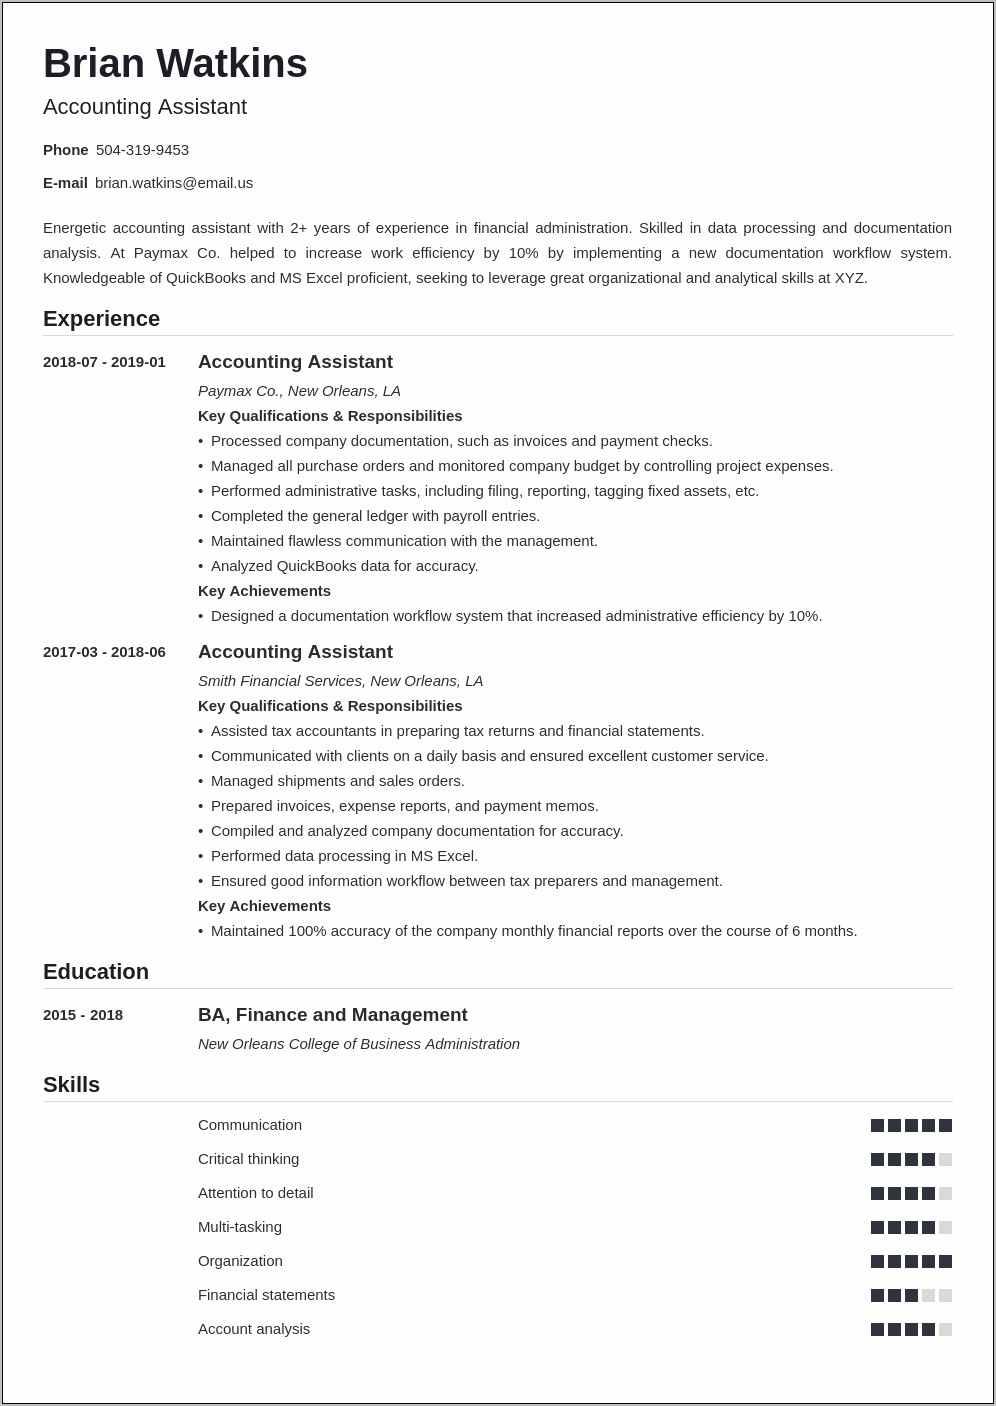 Resume Skills For Accounting Assistant